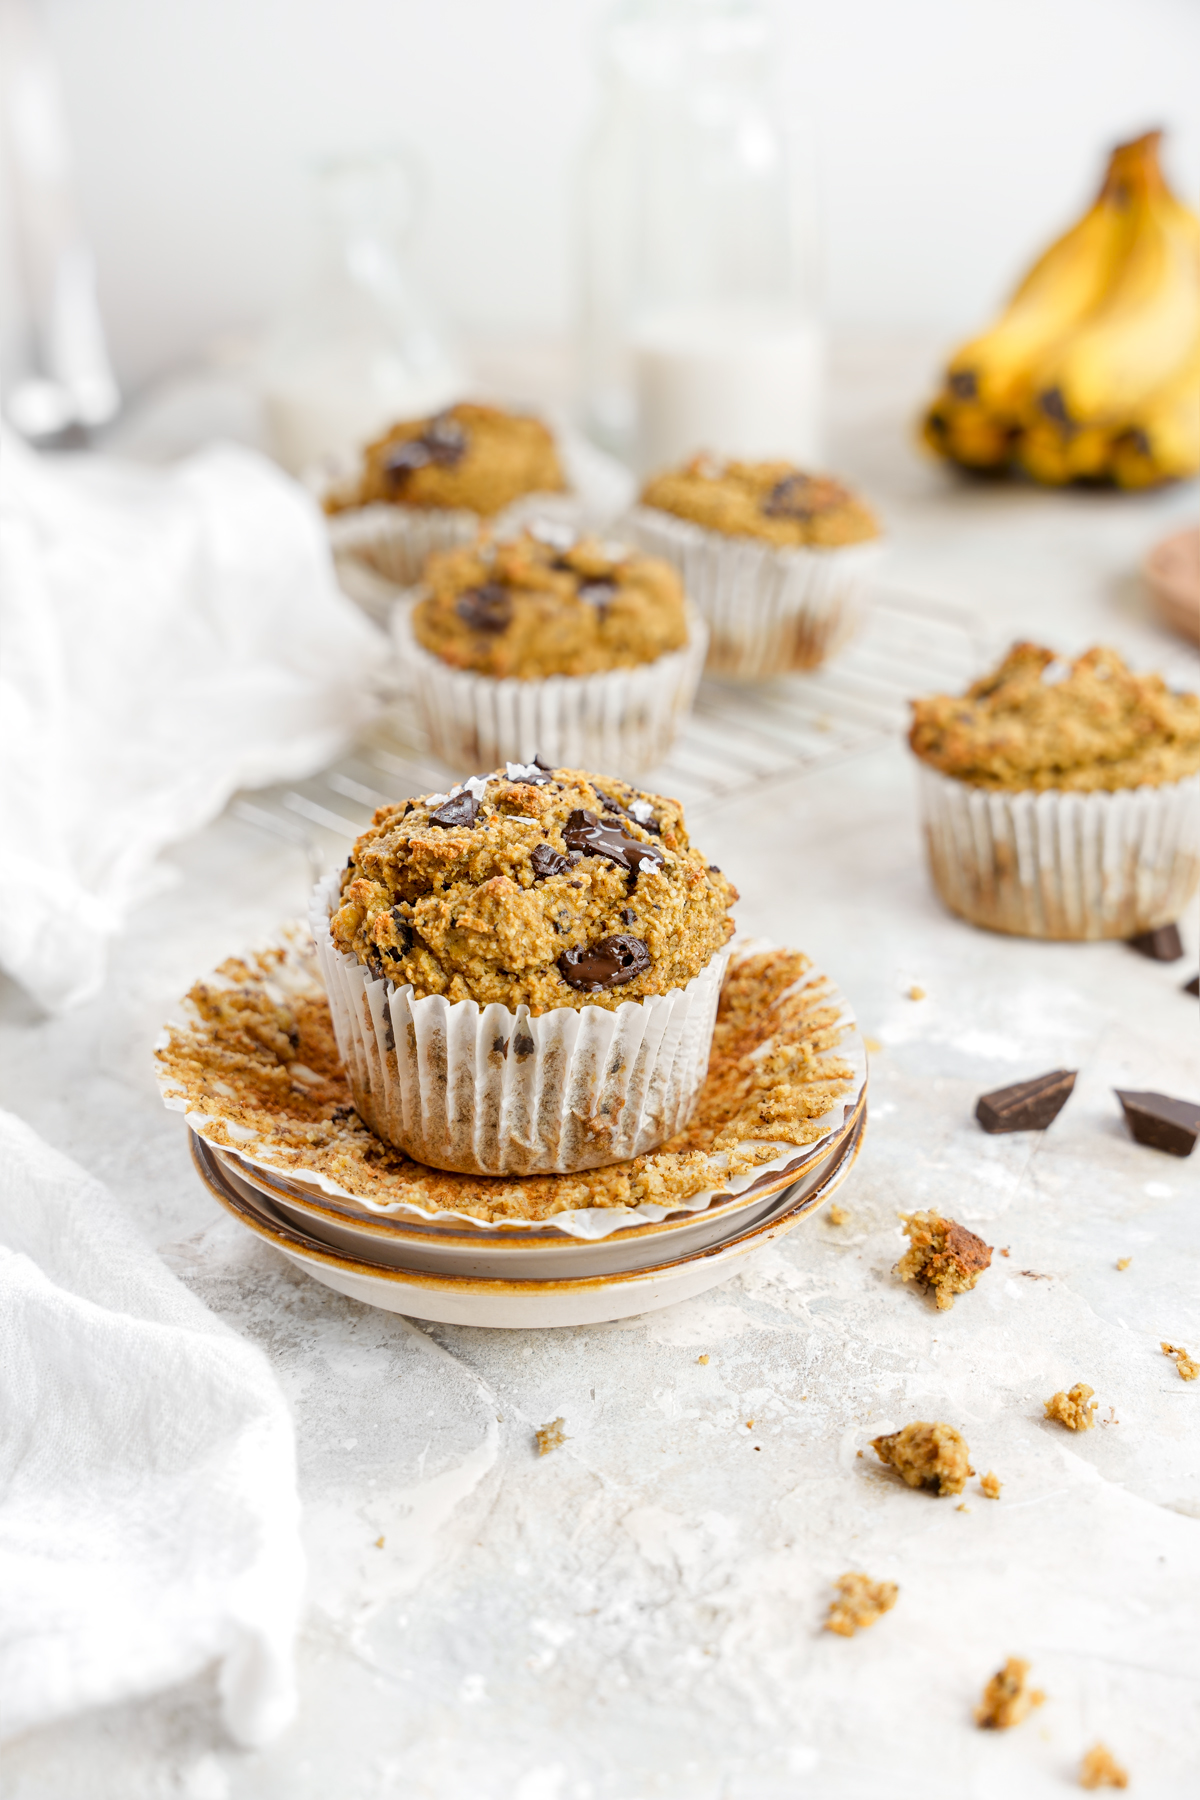 the vegan chocolate chip banana muffins lined up with crumbs and chocolate surrounding them